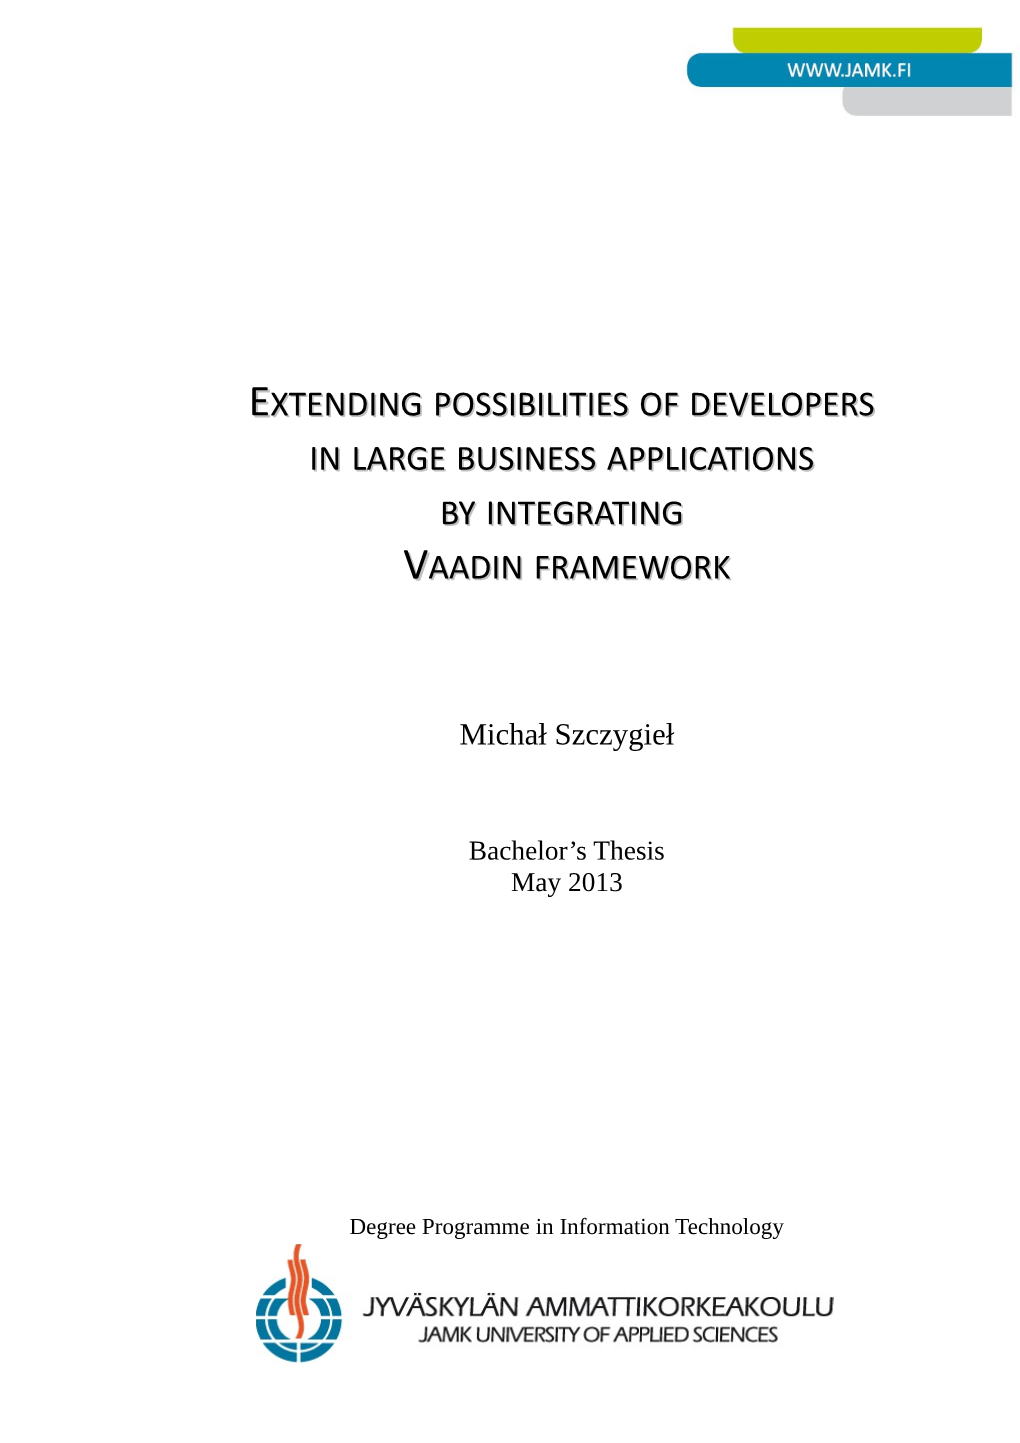 Extending Possibilities of Developers in Large Business Applications by Integrating Vvaadin Framework